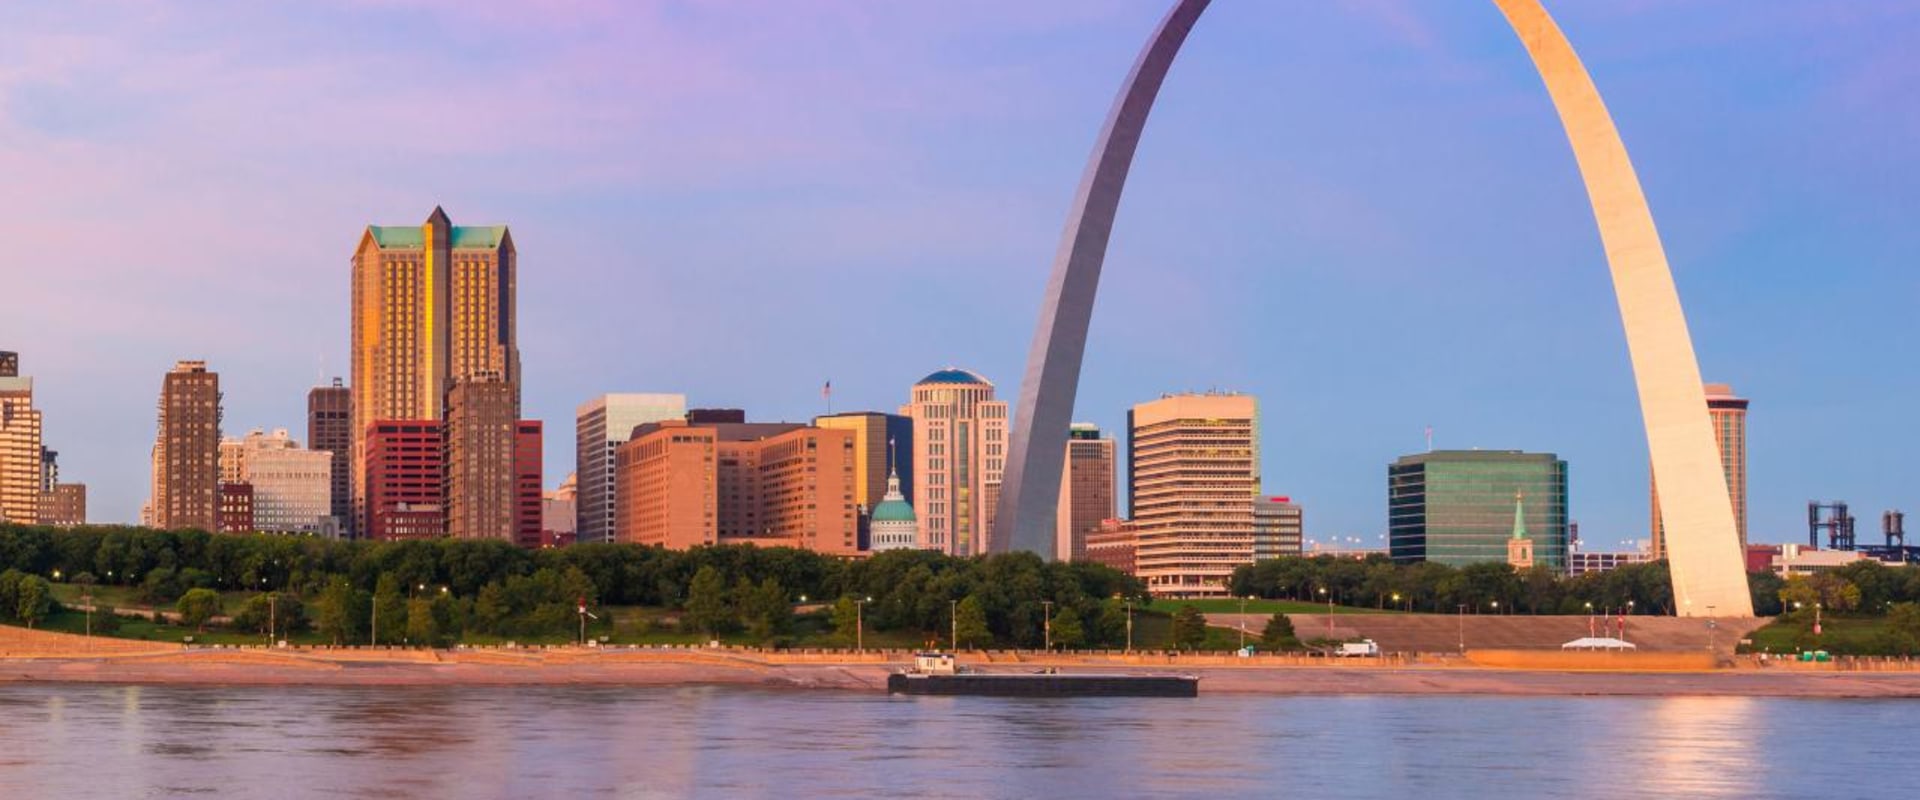 What is Interesting About St. Louis Missouri?